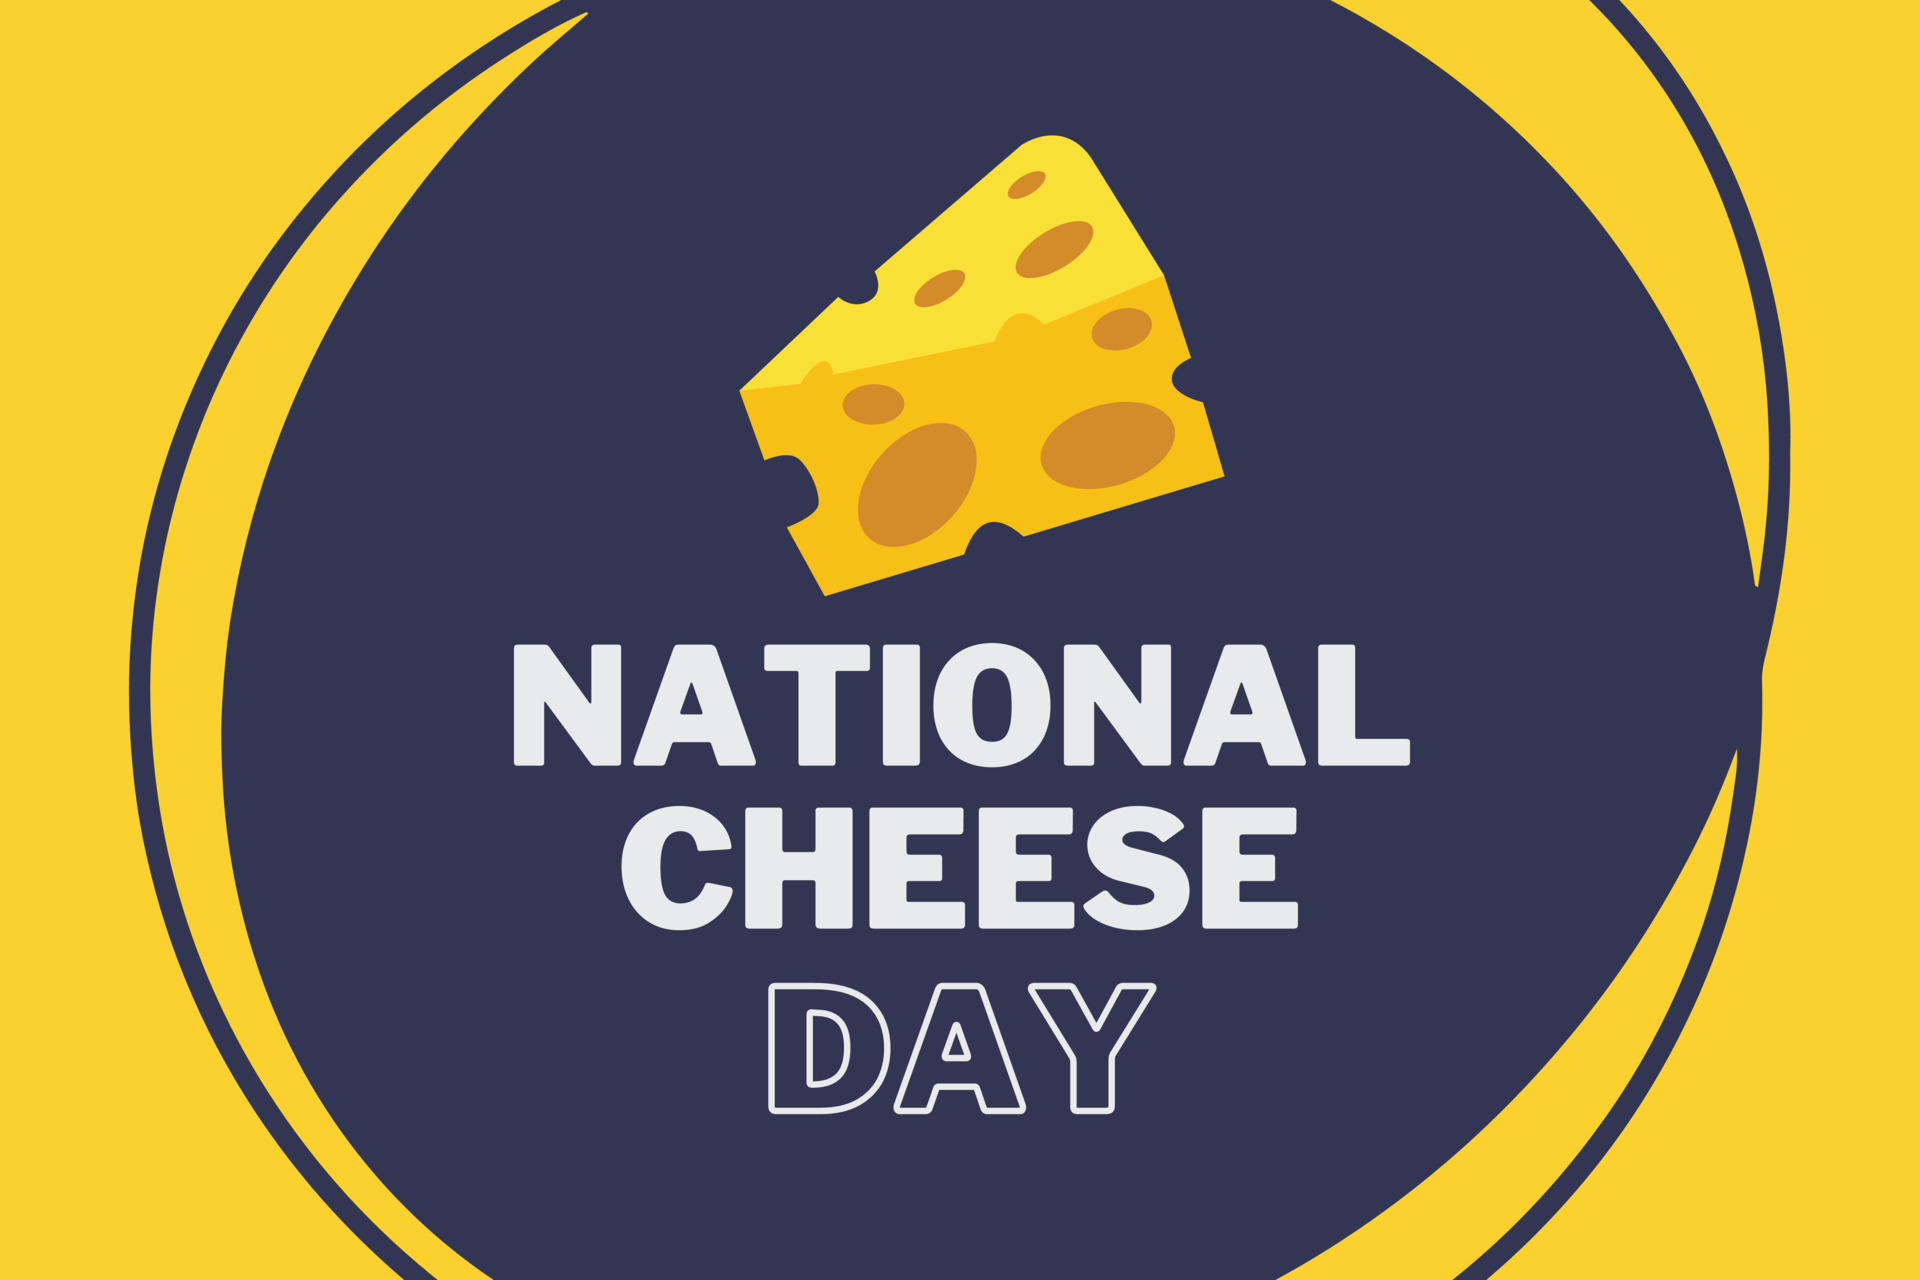 national cheese day poster suitable for social media post 23708425